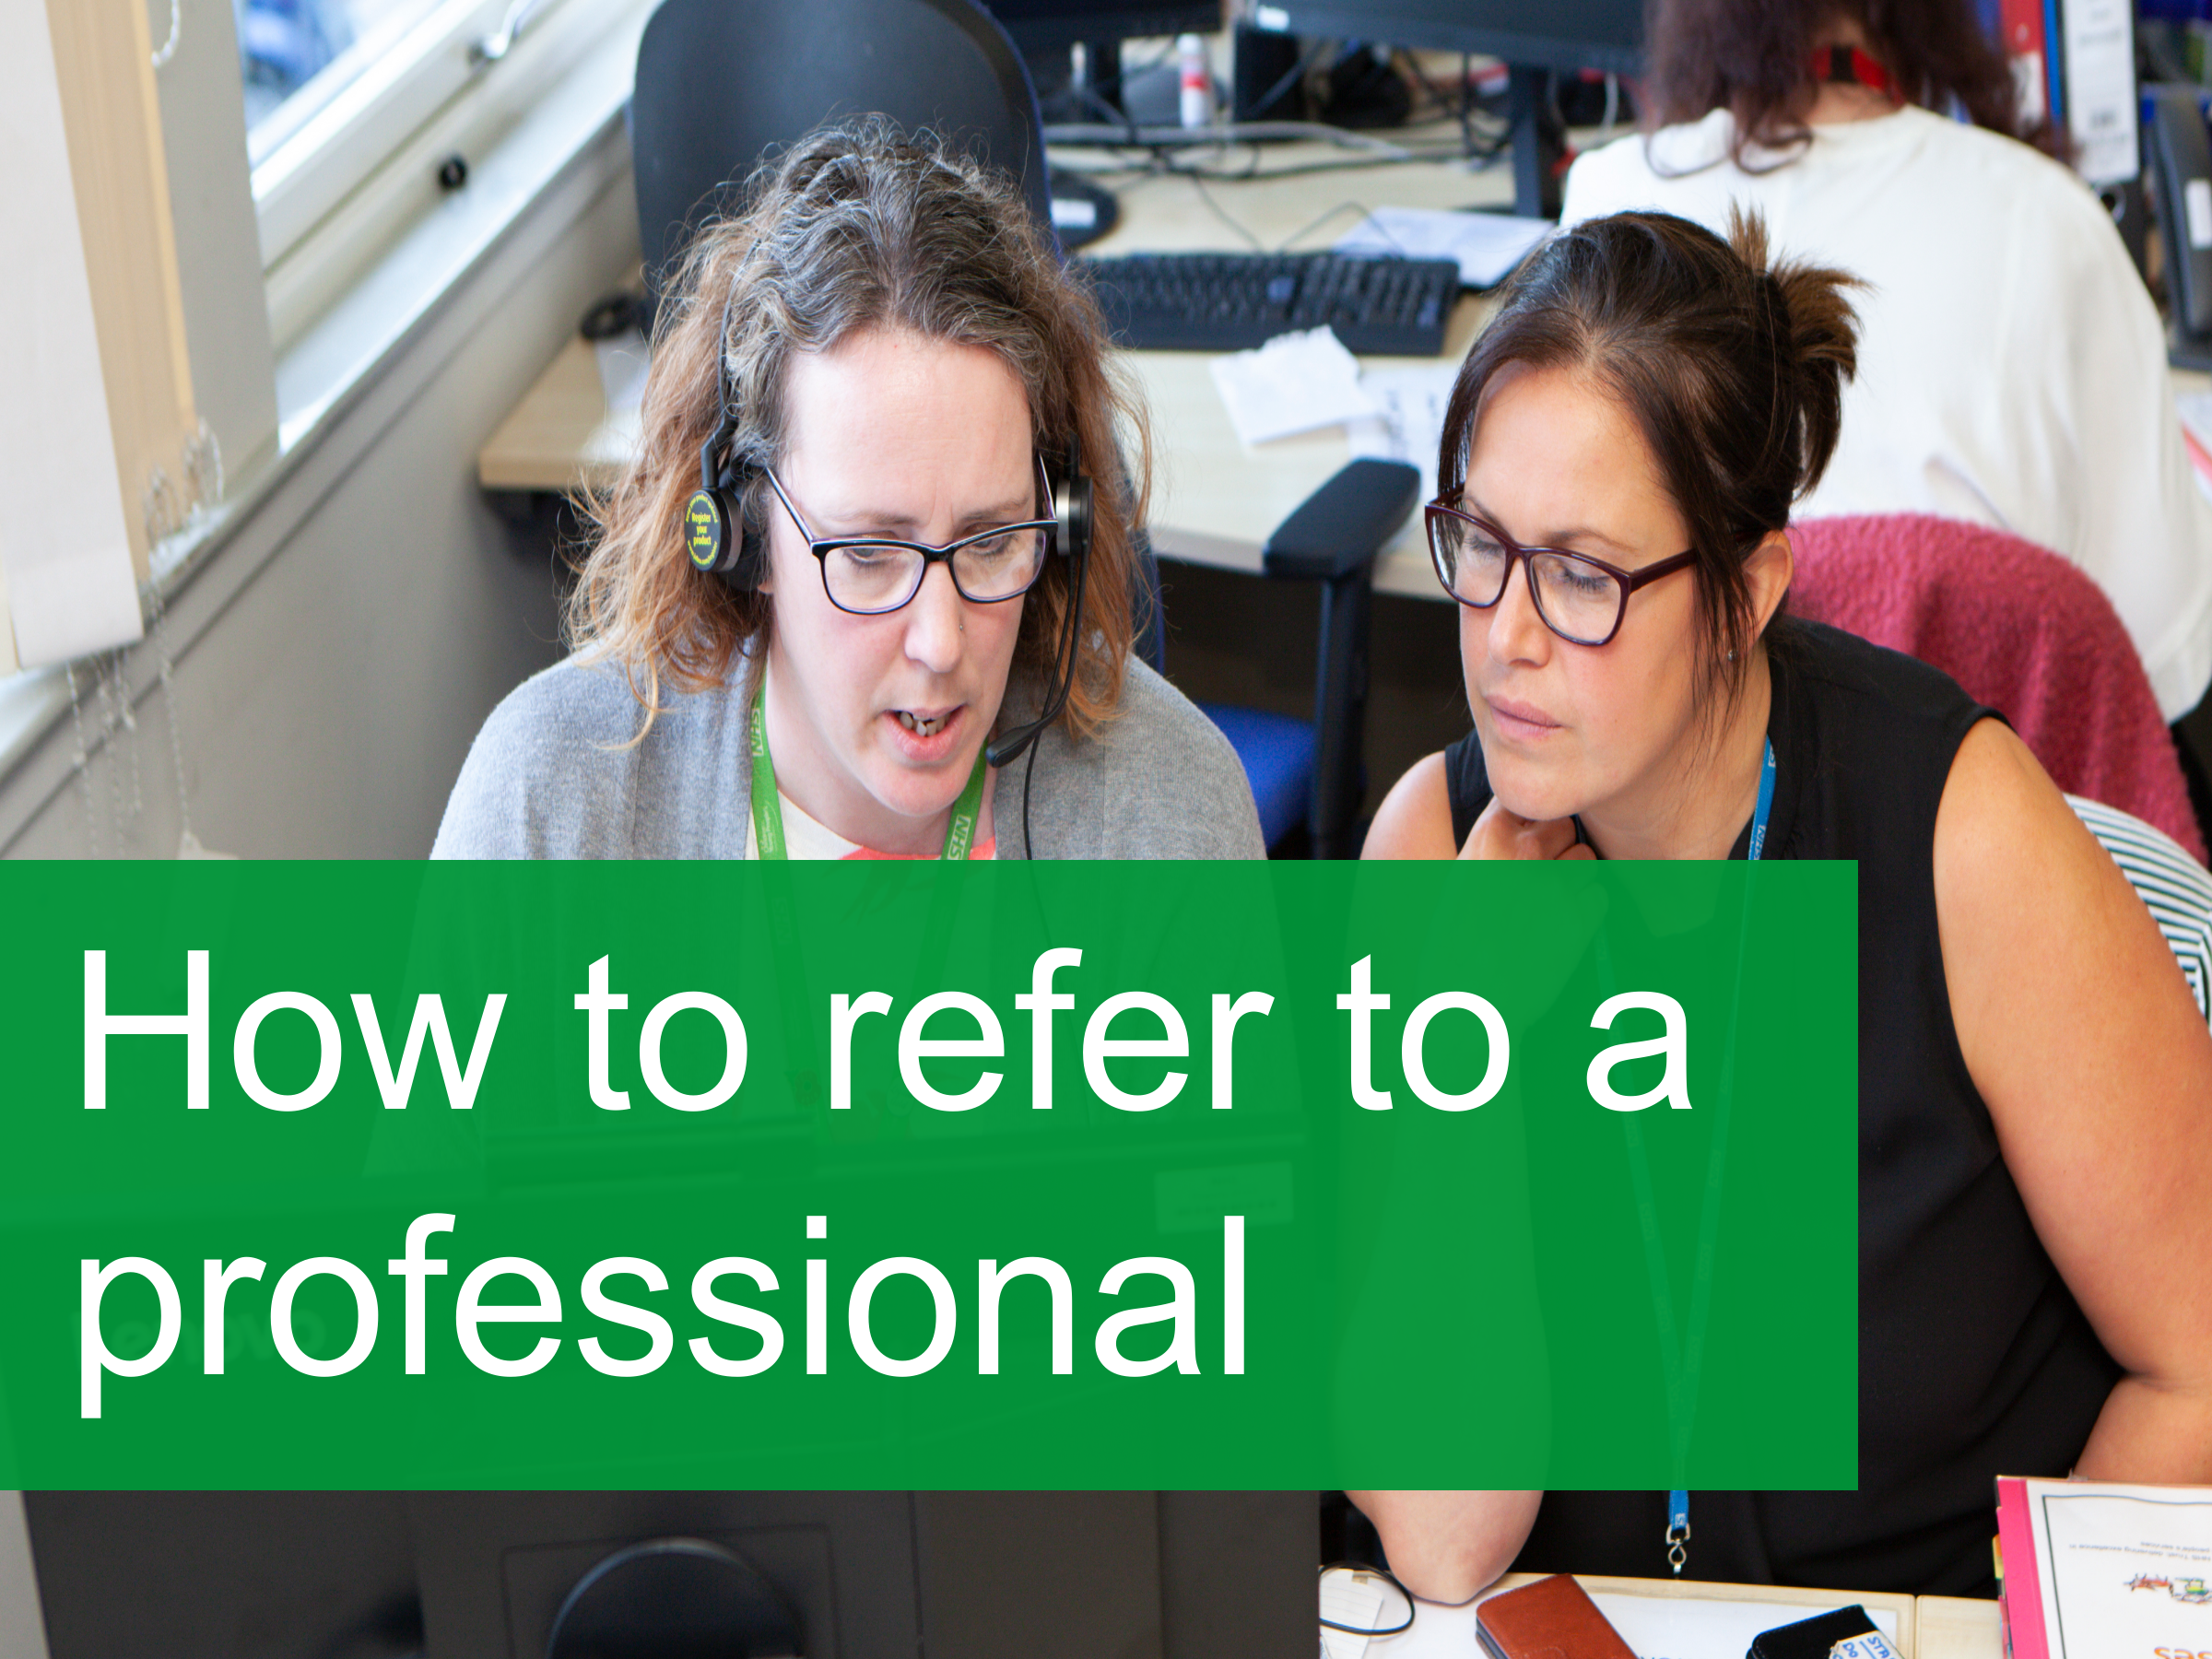 How to refer to a professional